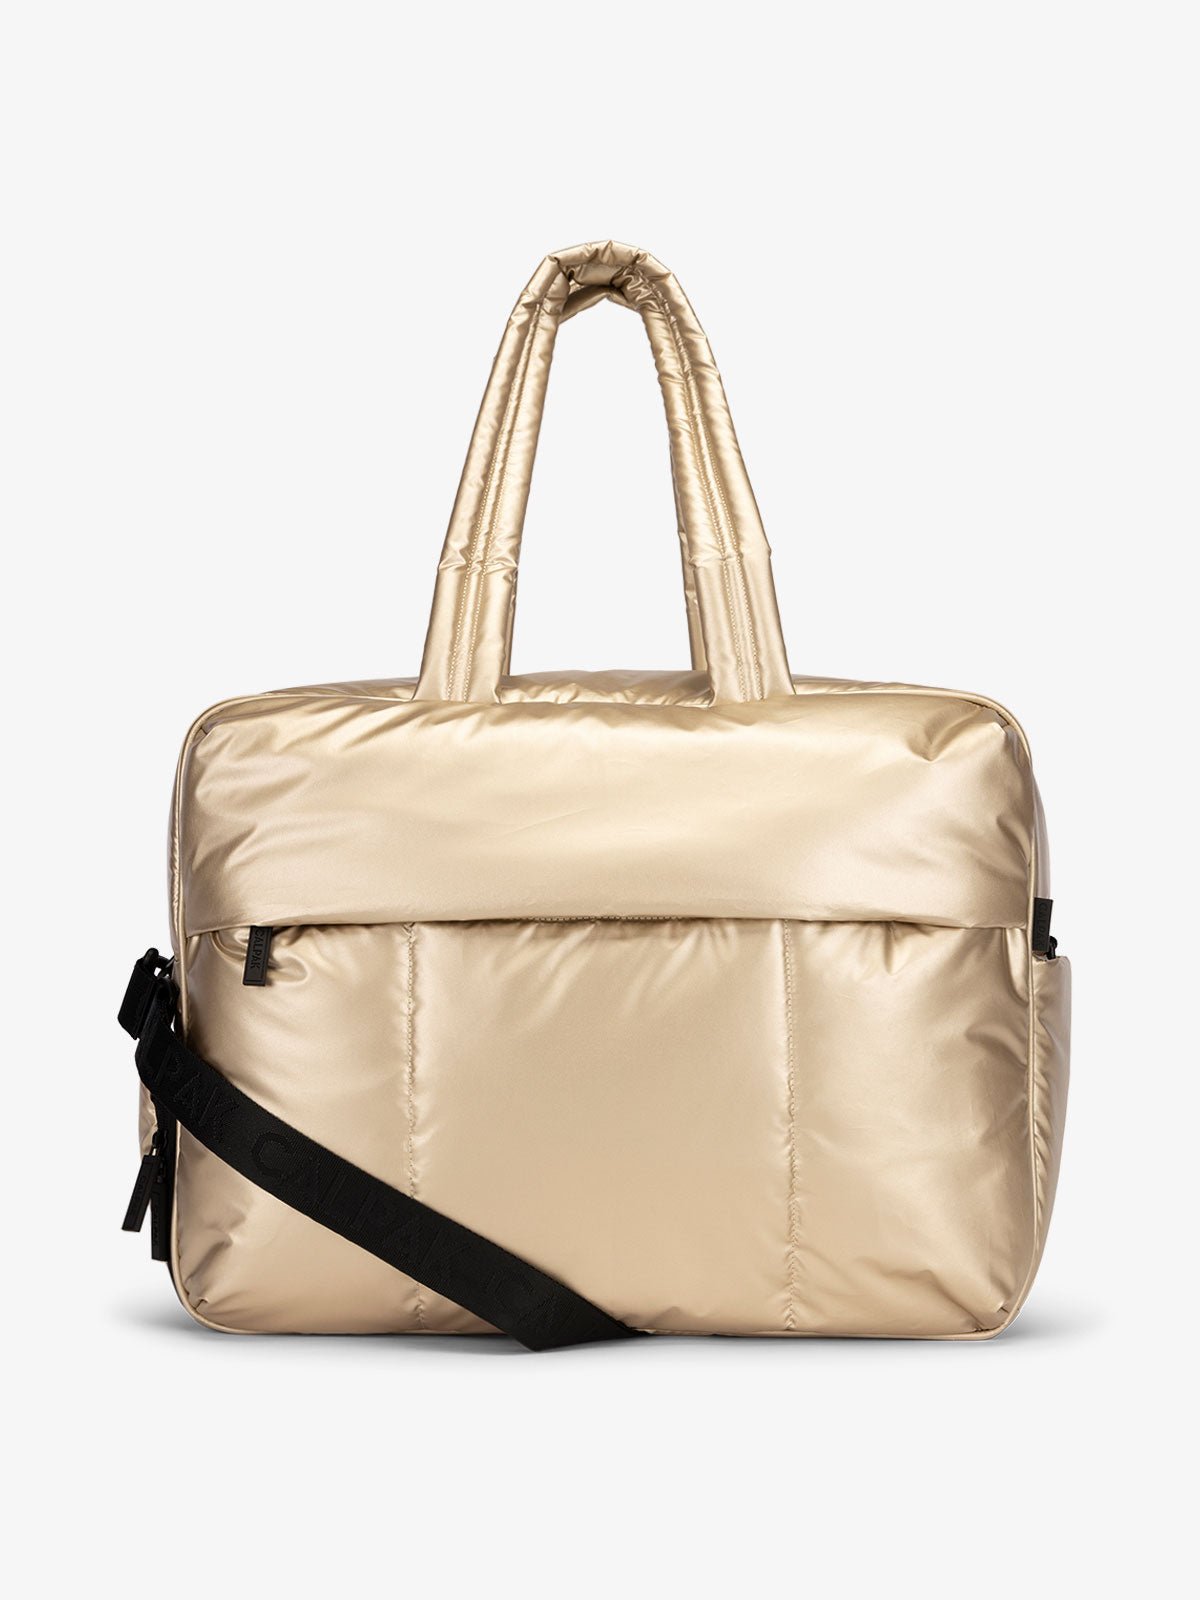 CALPAK Luka large duffle bag with detachable strap and zippered front pocket in metallic gold